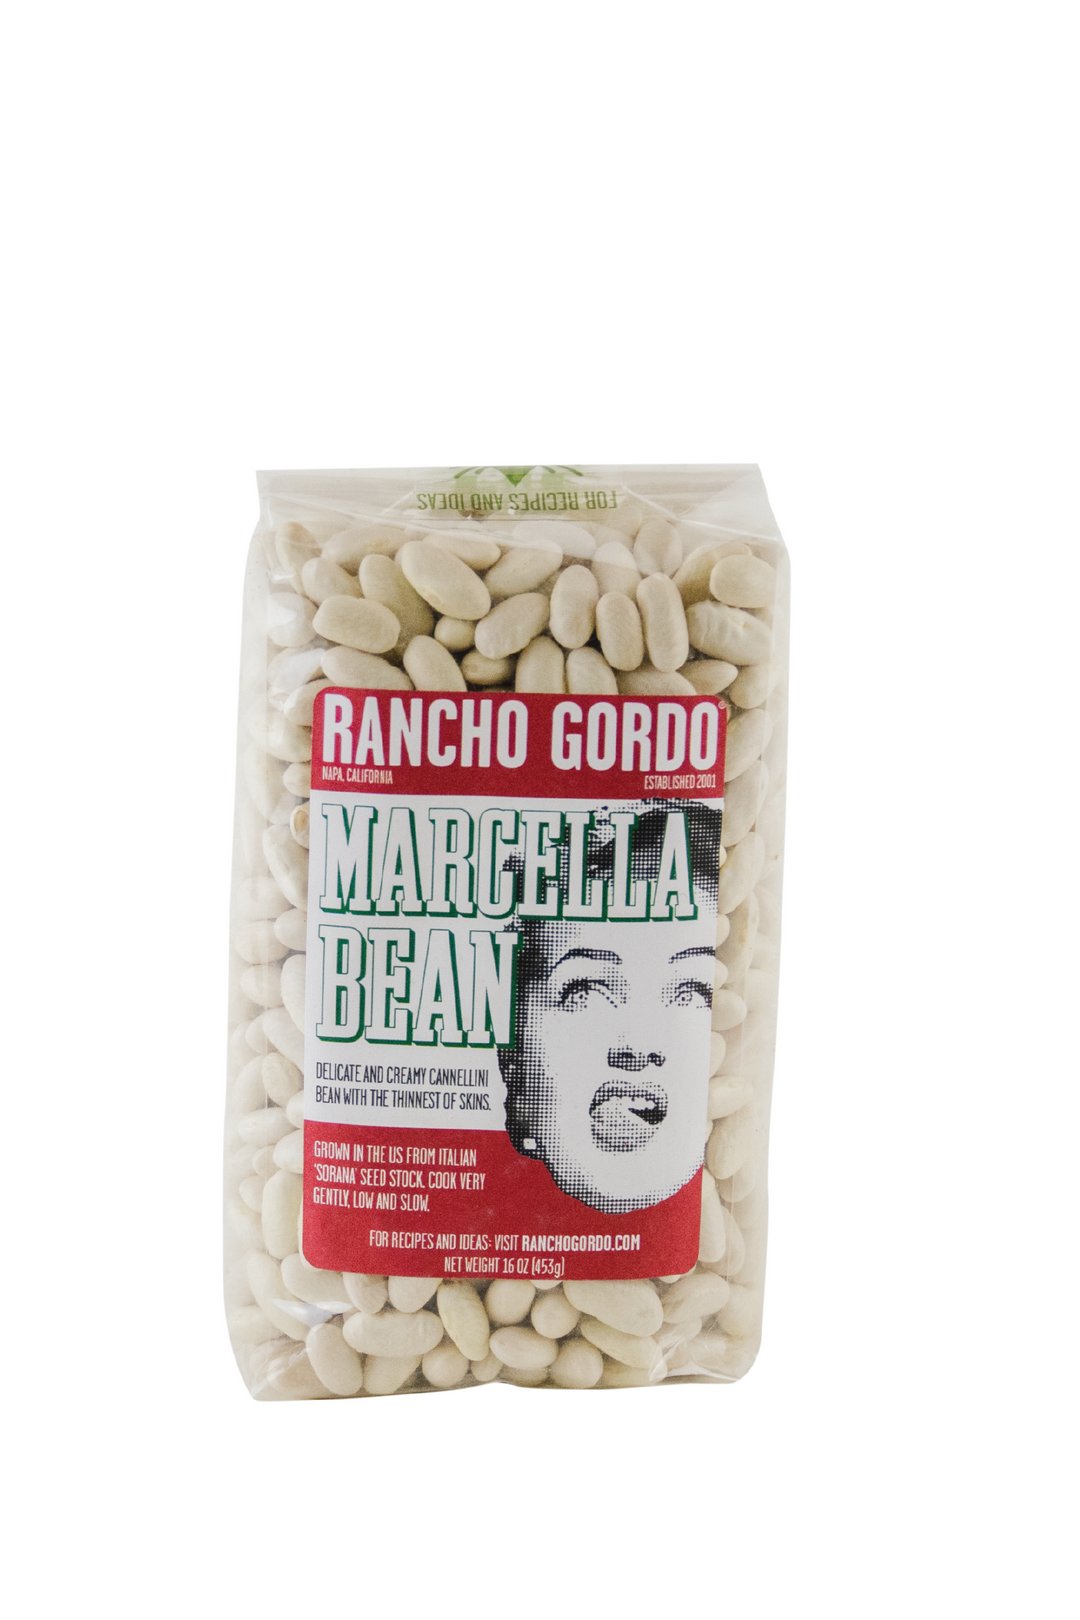 A One Pound Bag Of Rancho Gordo Marcella beans on a white background. Red and white label with an image of the face of a woman licking her upper lip. Additional text on bag reads: Delicate and creamy cannellini bean with the thinnest of skins. Grown in the US from Italian 'Sorana' seed stock, cook very gently, low and slow.